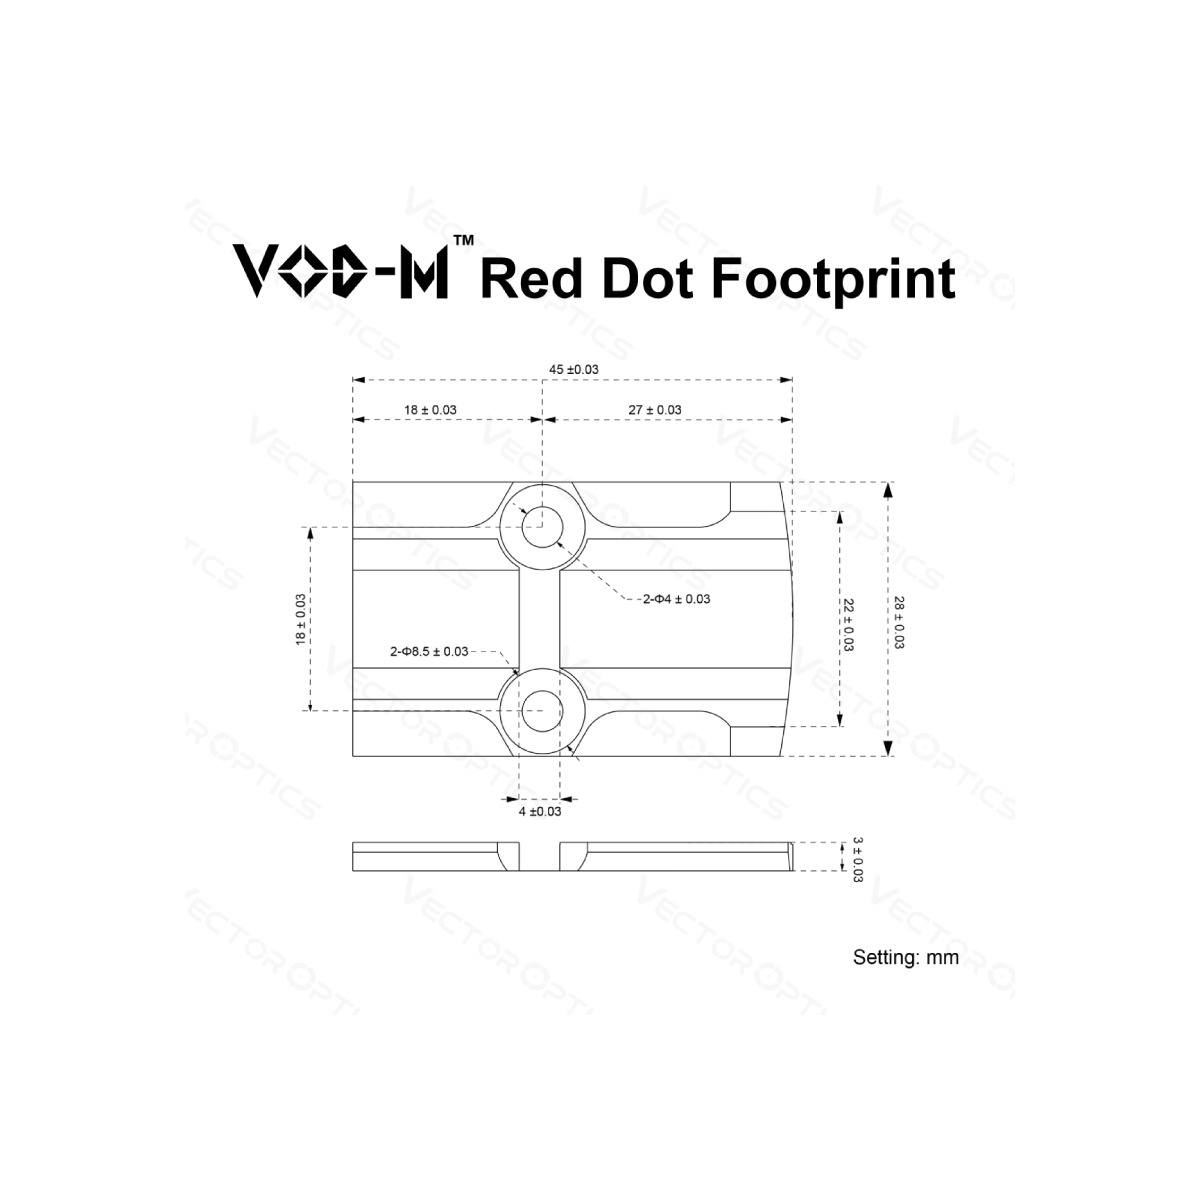 SCFRM-13 Enclosed Red Dot Sight MOJ to VOD Adapter Webp